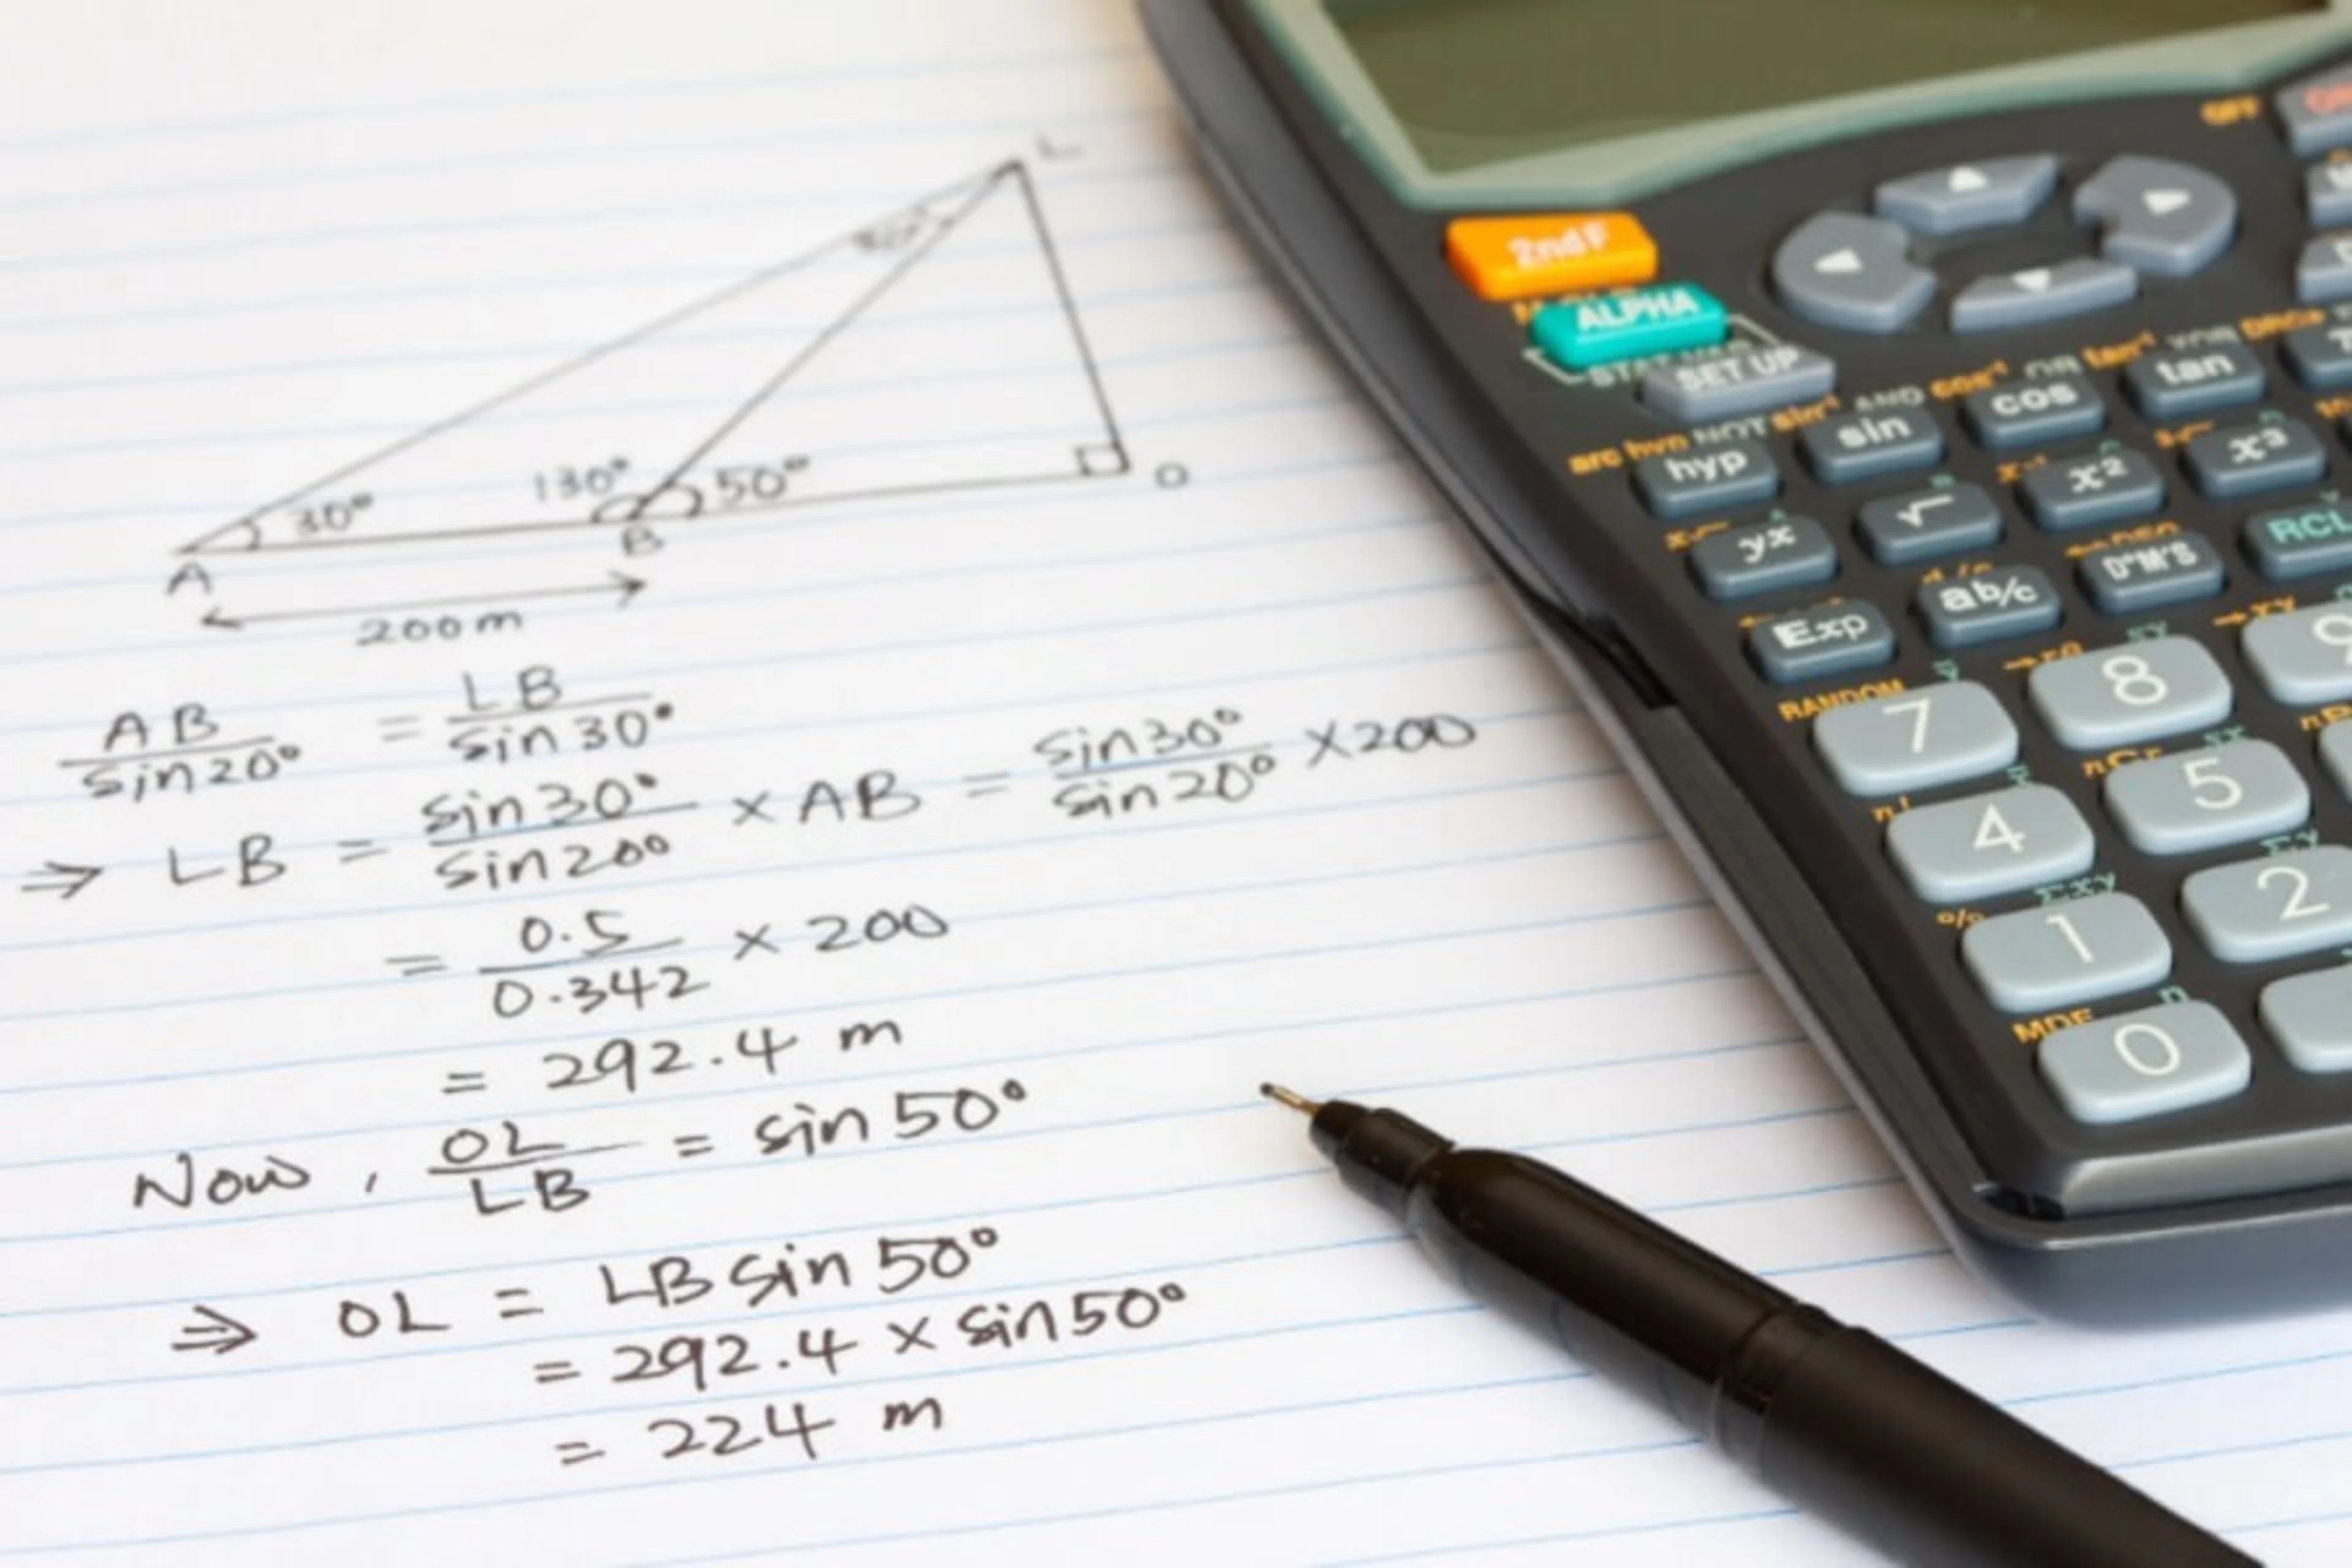 Math calculations written on a piece of paper by hand. A triangle is drawn and the calculations show the use of trigonometric functions to calculate a length of the triangle's side